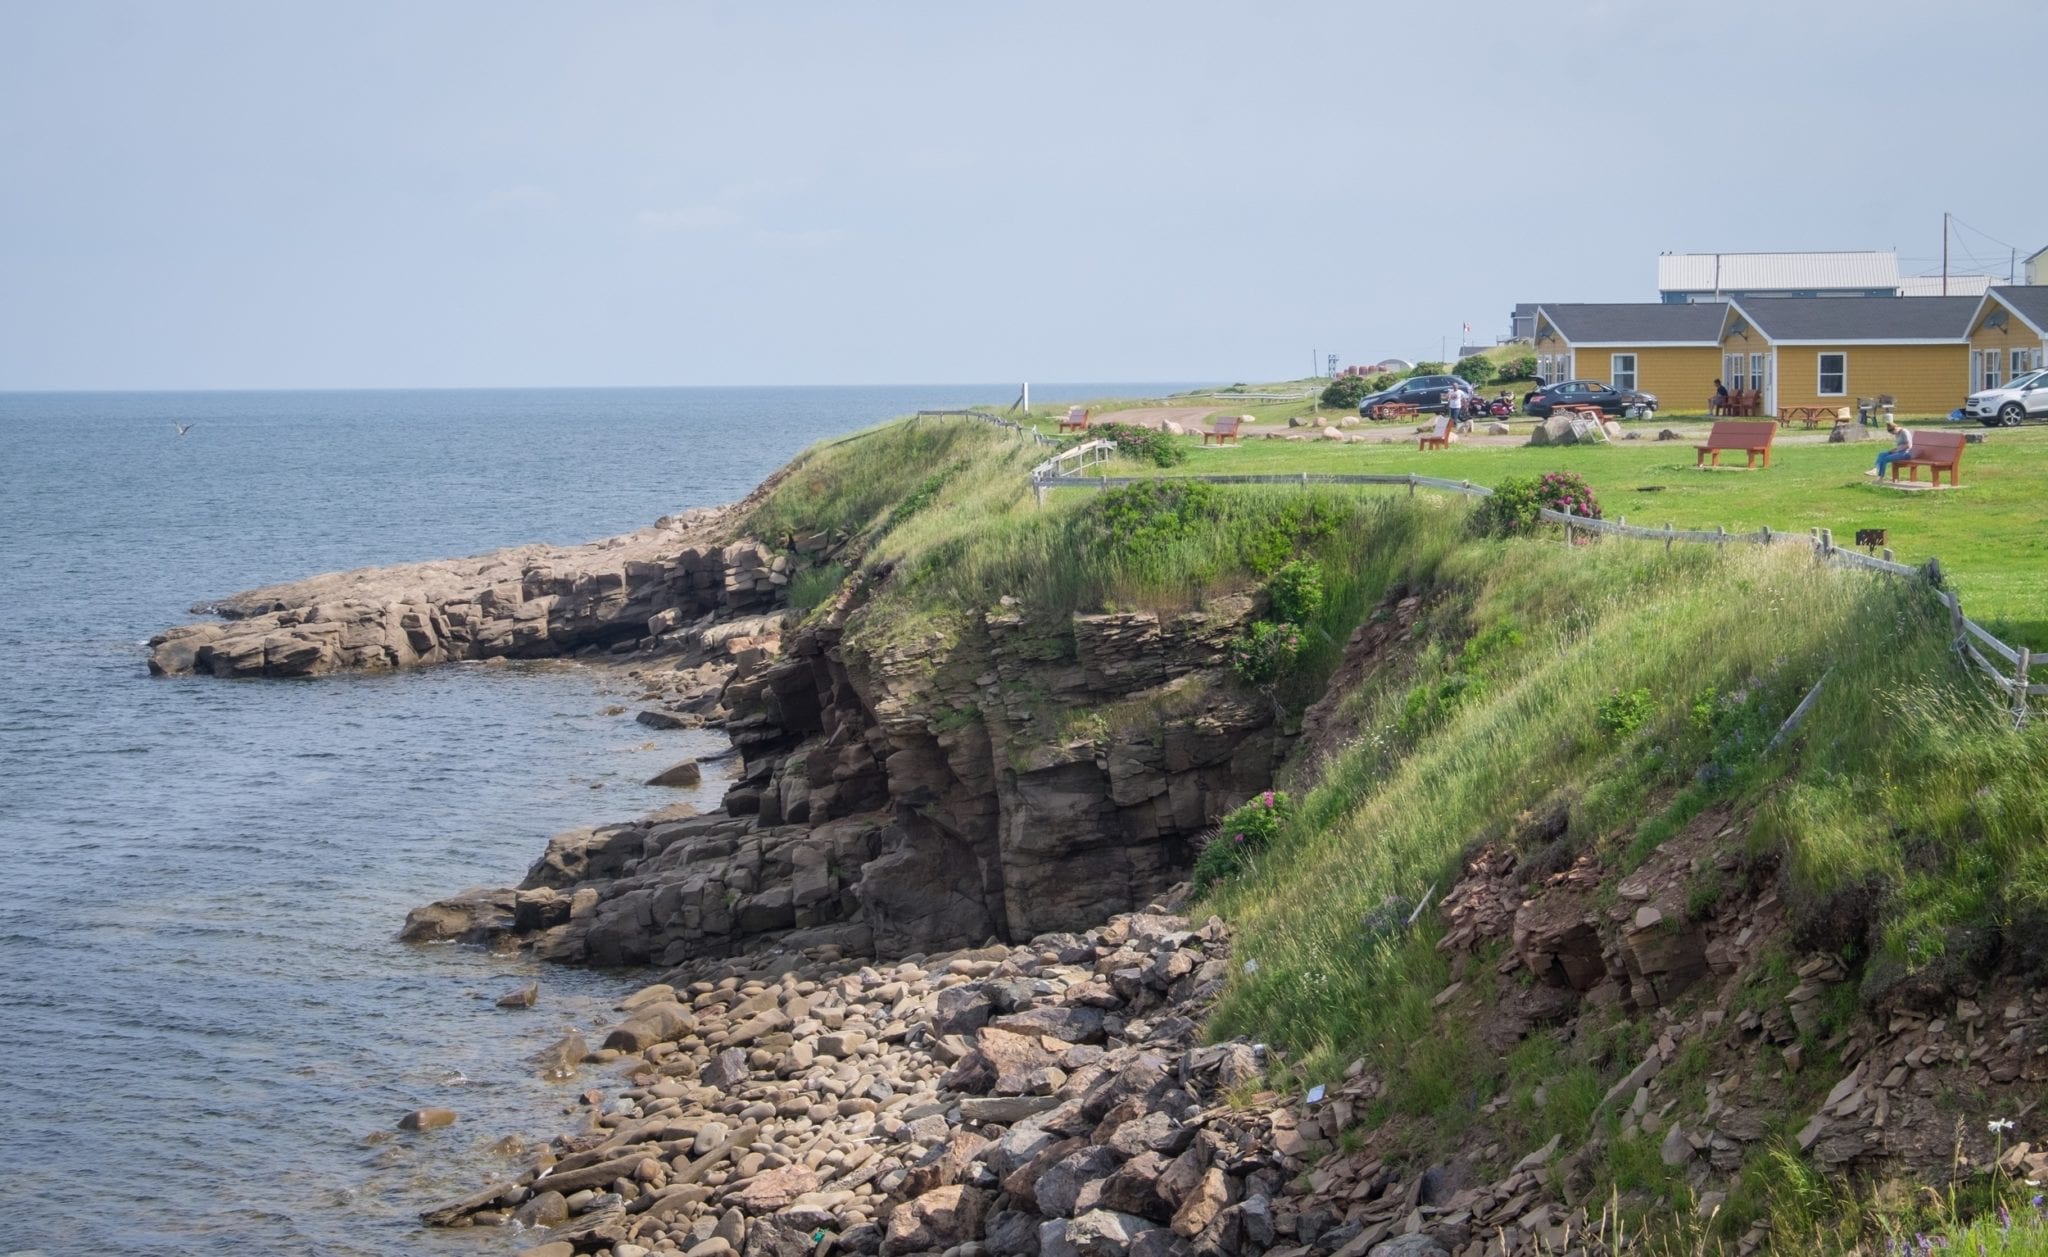 A rocky coastline falls into the sea. On the top is grass, two yellow cottages, benches, and picnic tables.